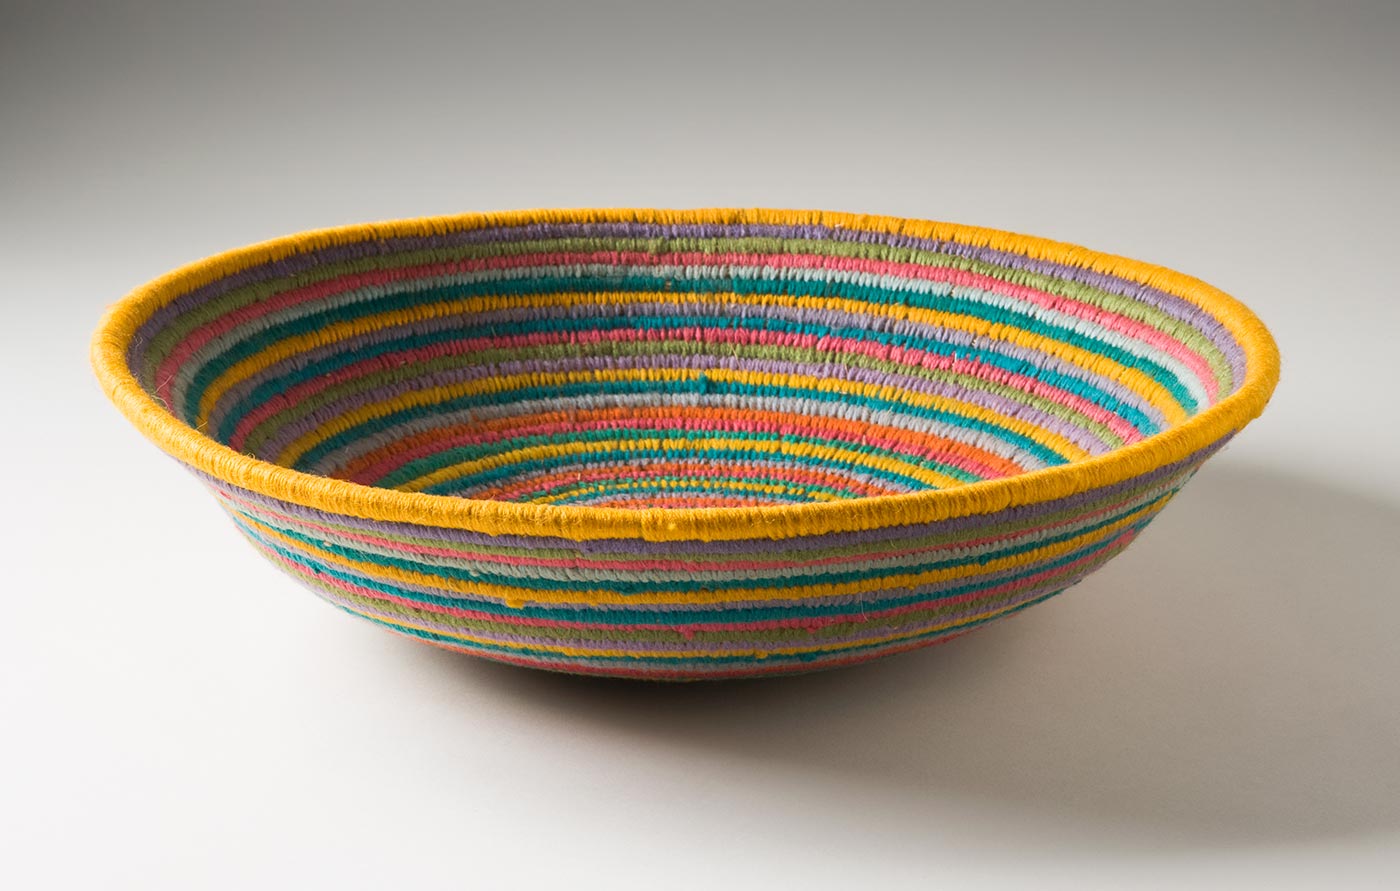 A multi-coloured circular coiled bowl-shaped basket made of yarn and plant fibre. The centre of the basket is in yellow yarn followed by horizontal stripes of yarn in lime green, lavender, pink, orange, yellow and light blue grey. - click to view larger image